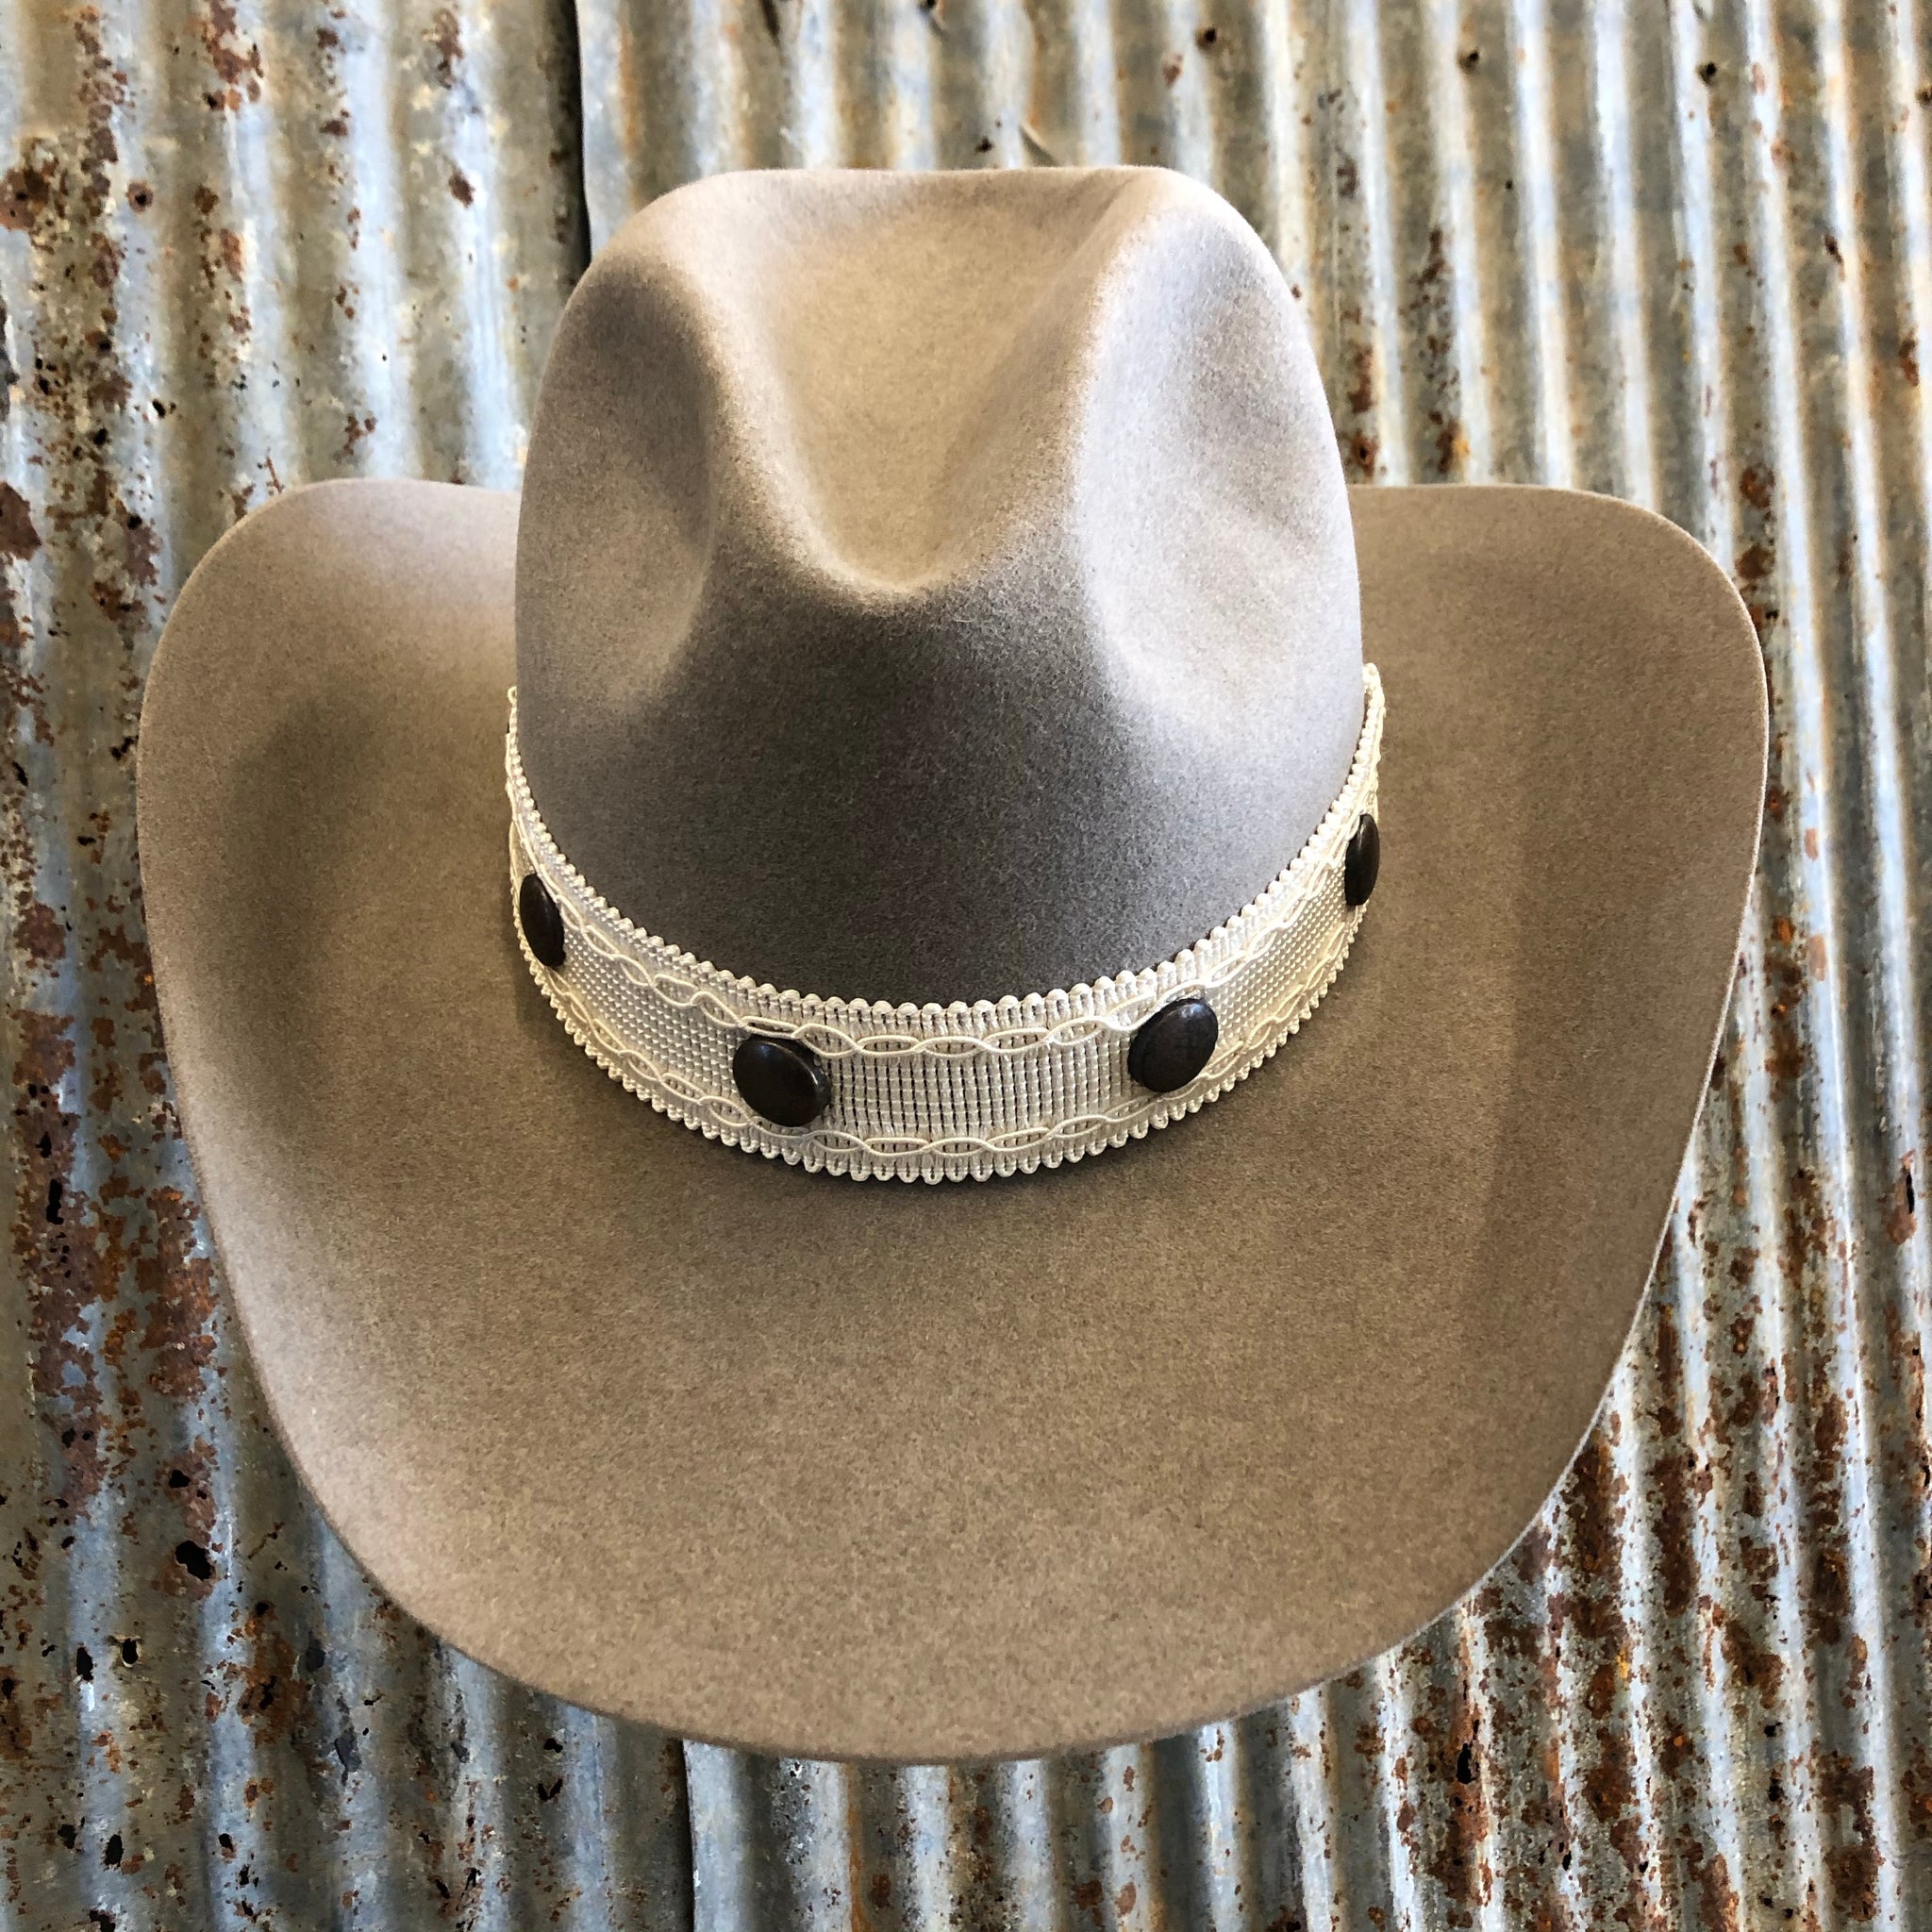 The Art of Western Hat Making with Greeley Hat Works Owner, Trent